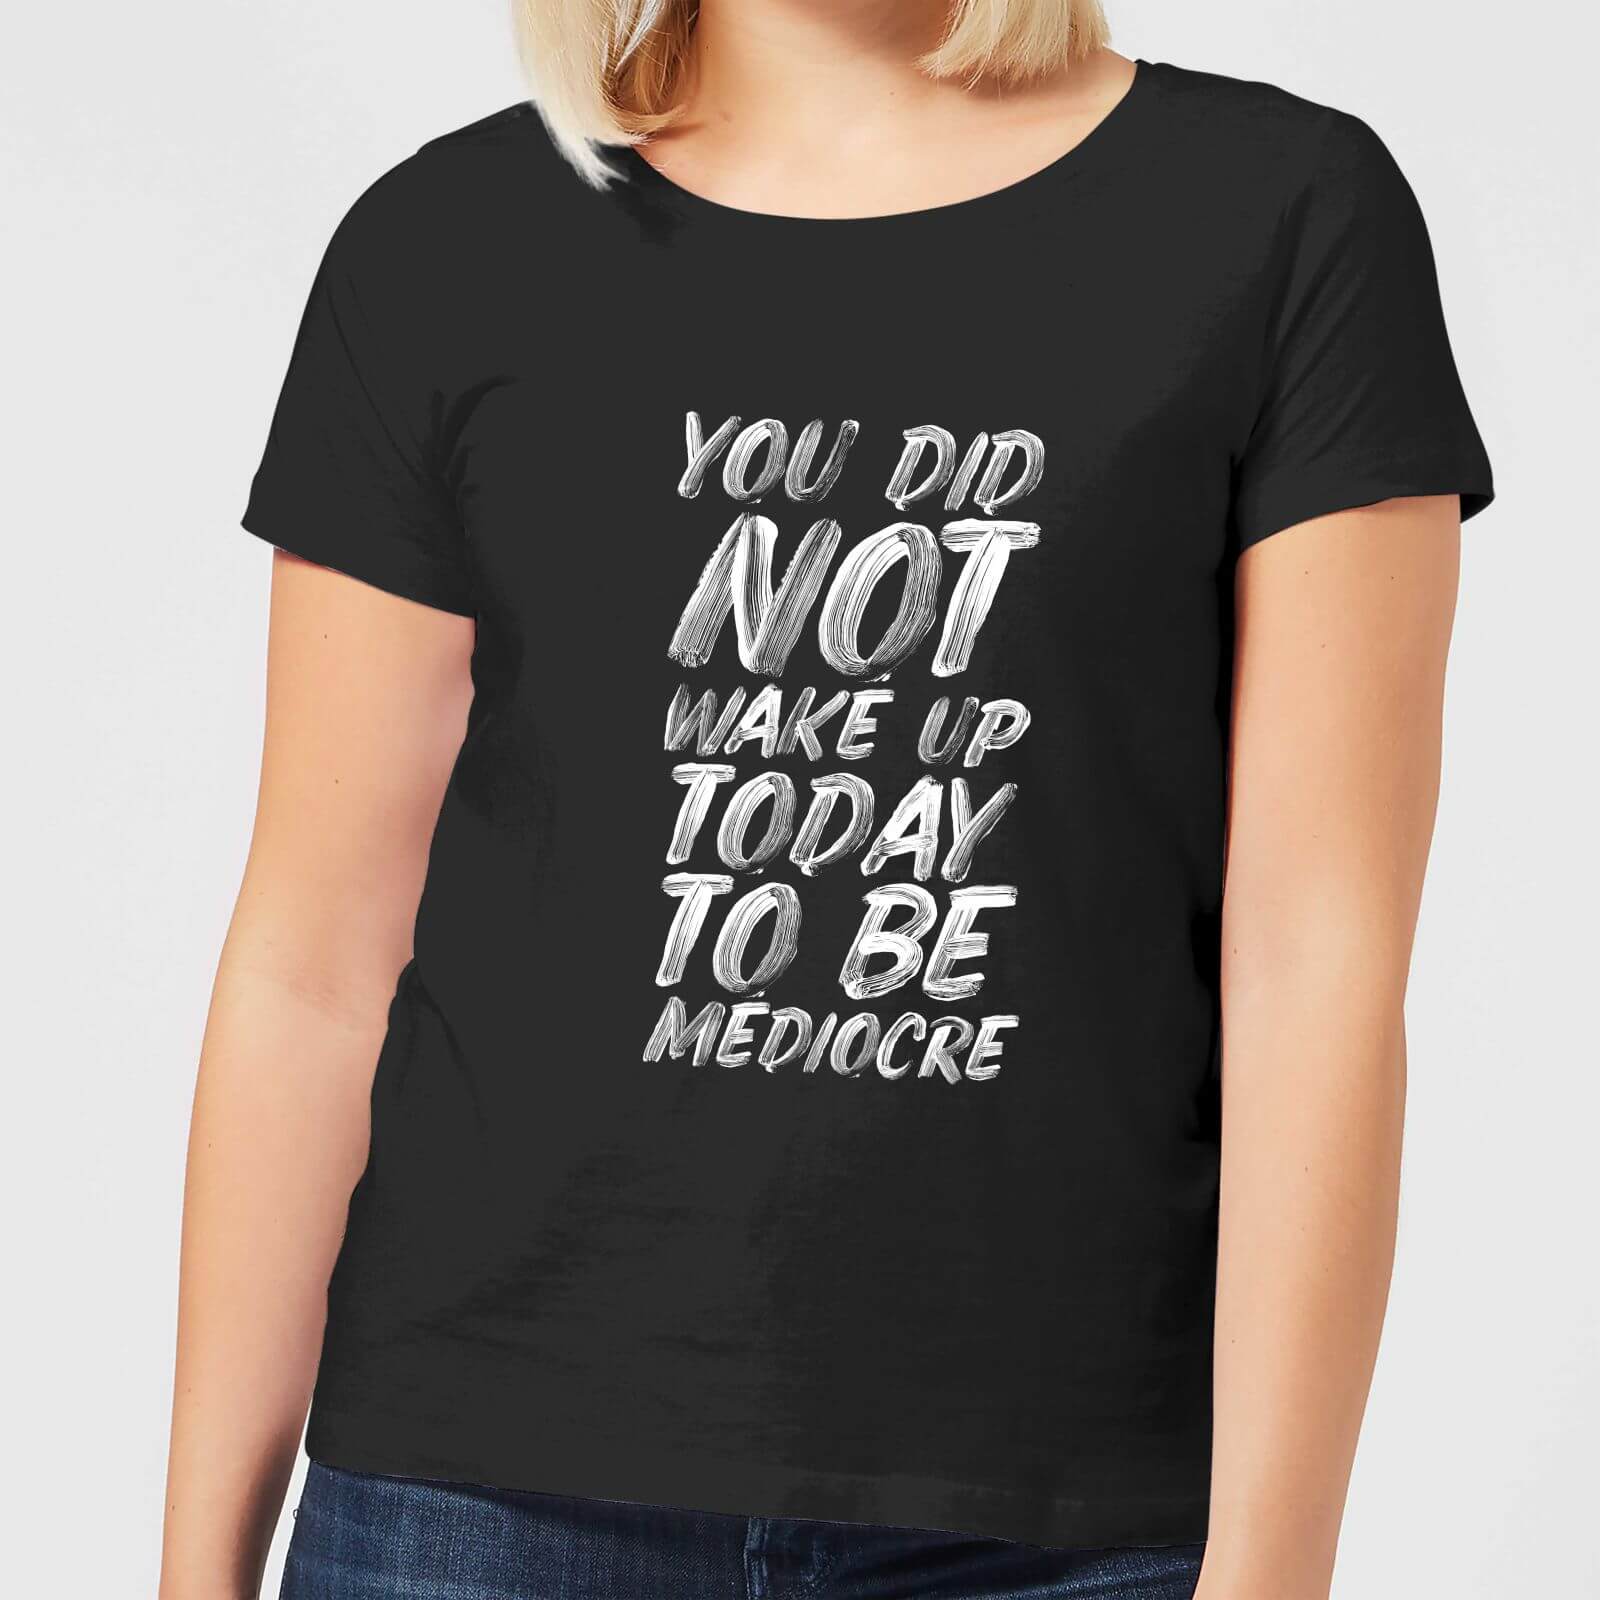 The Motivated Type You Did Not Wake Up Today To Be Mediocre Women's T-Shirt - Black - S - Black